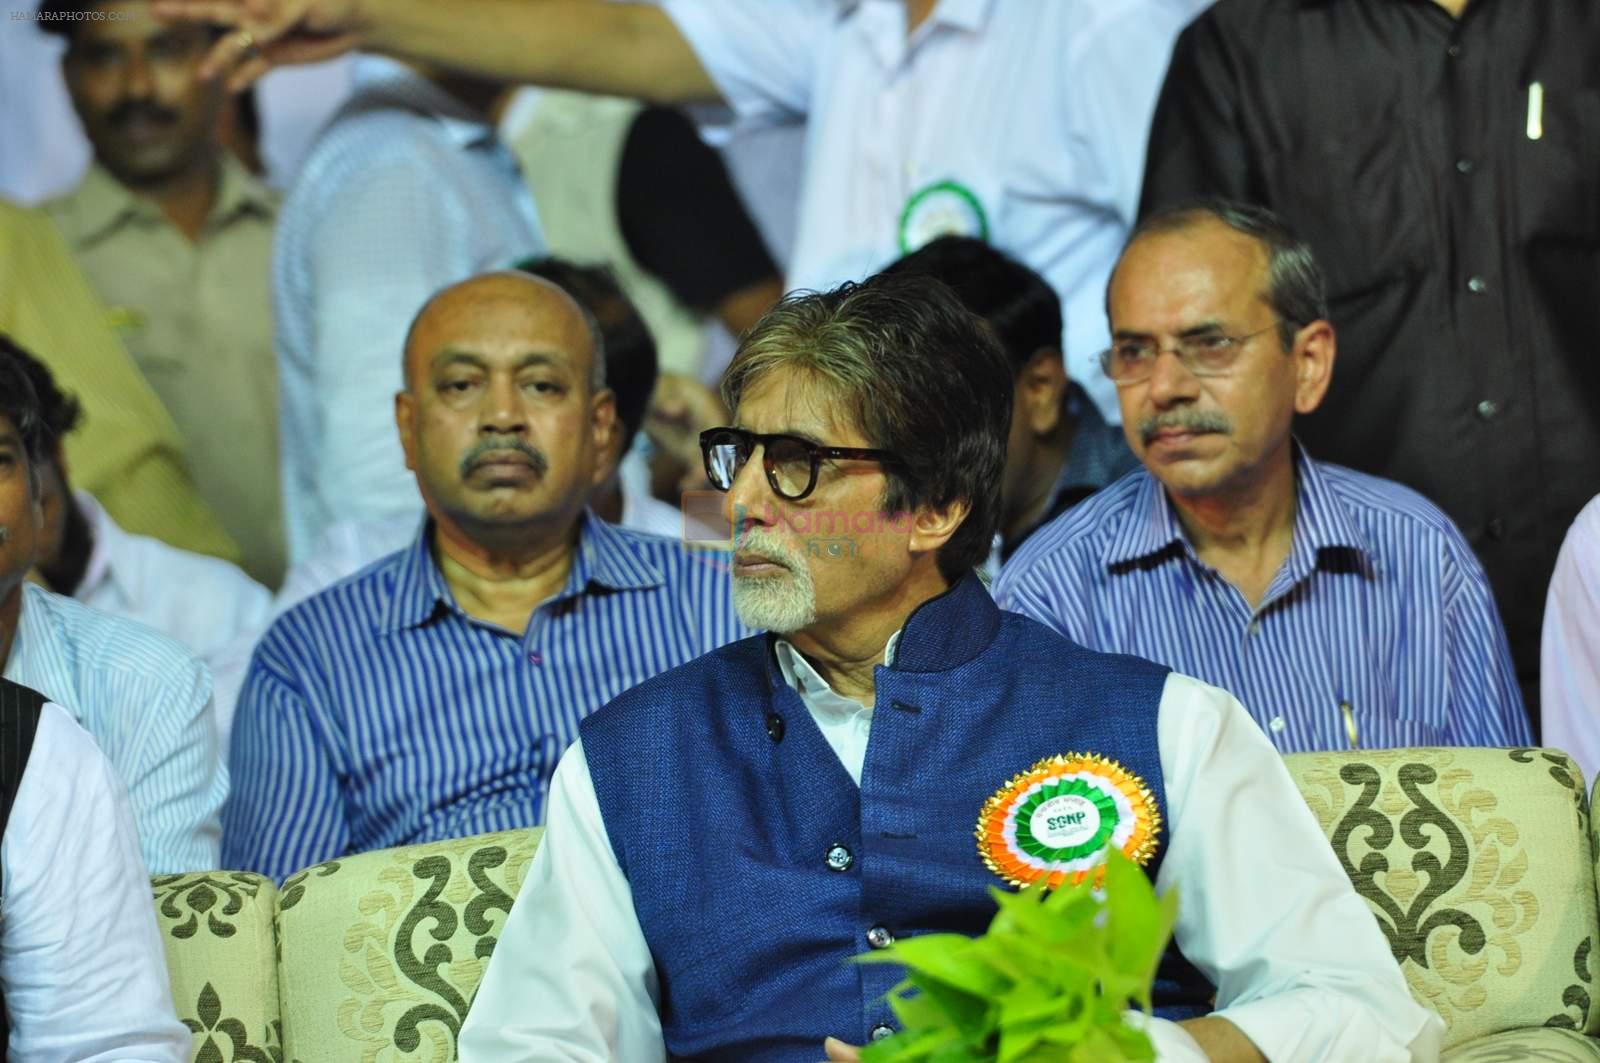 Amitabh Bachchan save the tigers event at national park on 6th Oct 2015